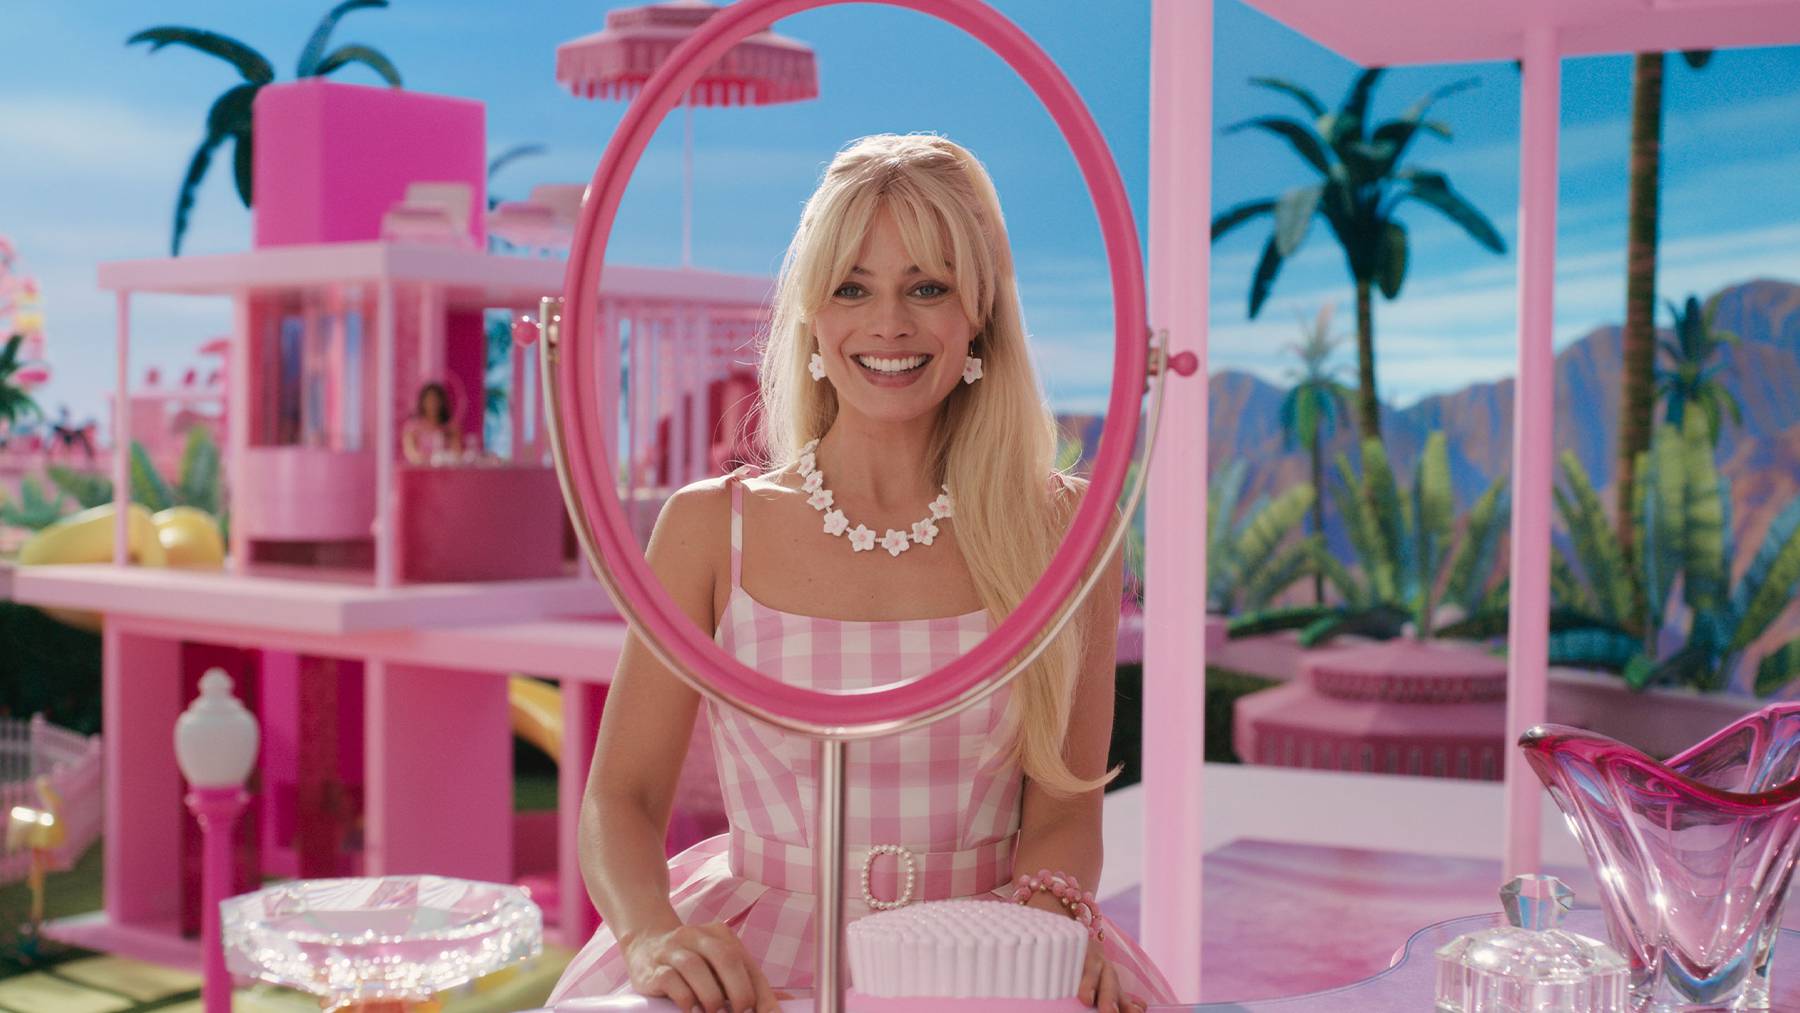 The second Barbie movie trailer, which is expected to have a big impact on fashion, sent fans into frenzy.